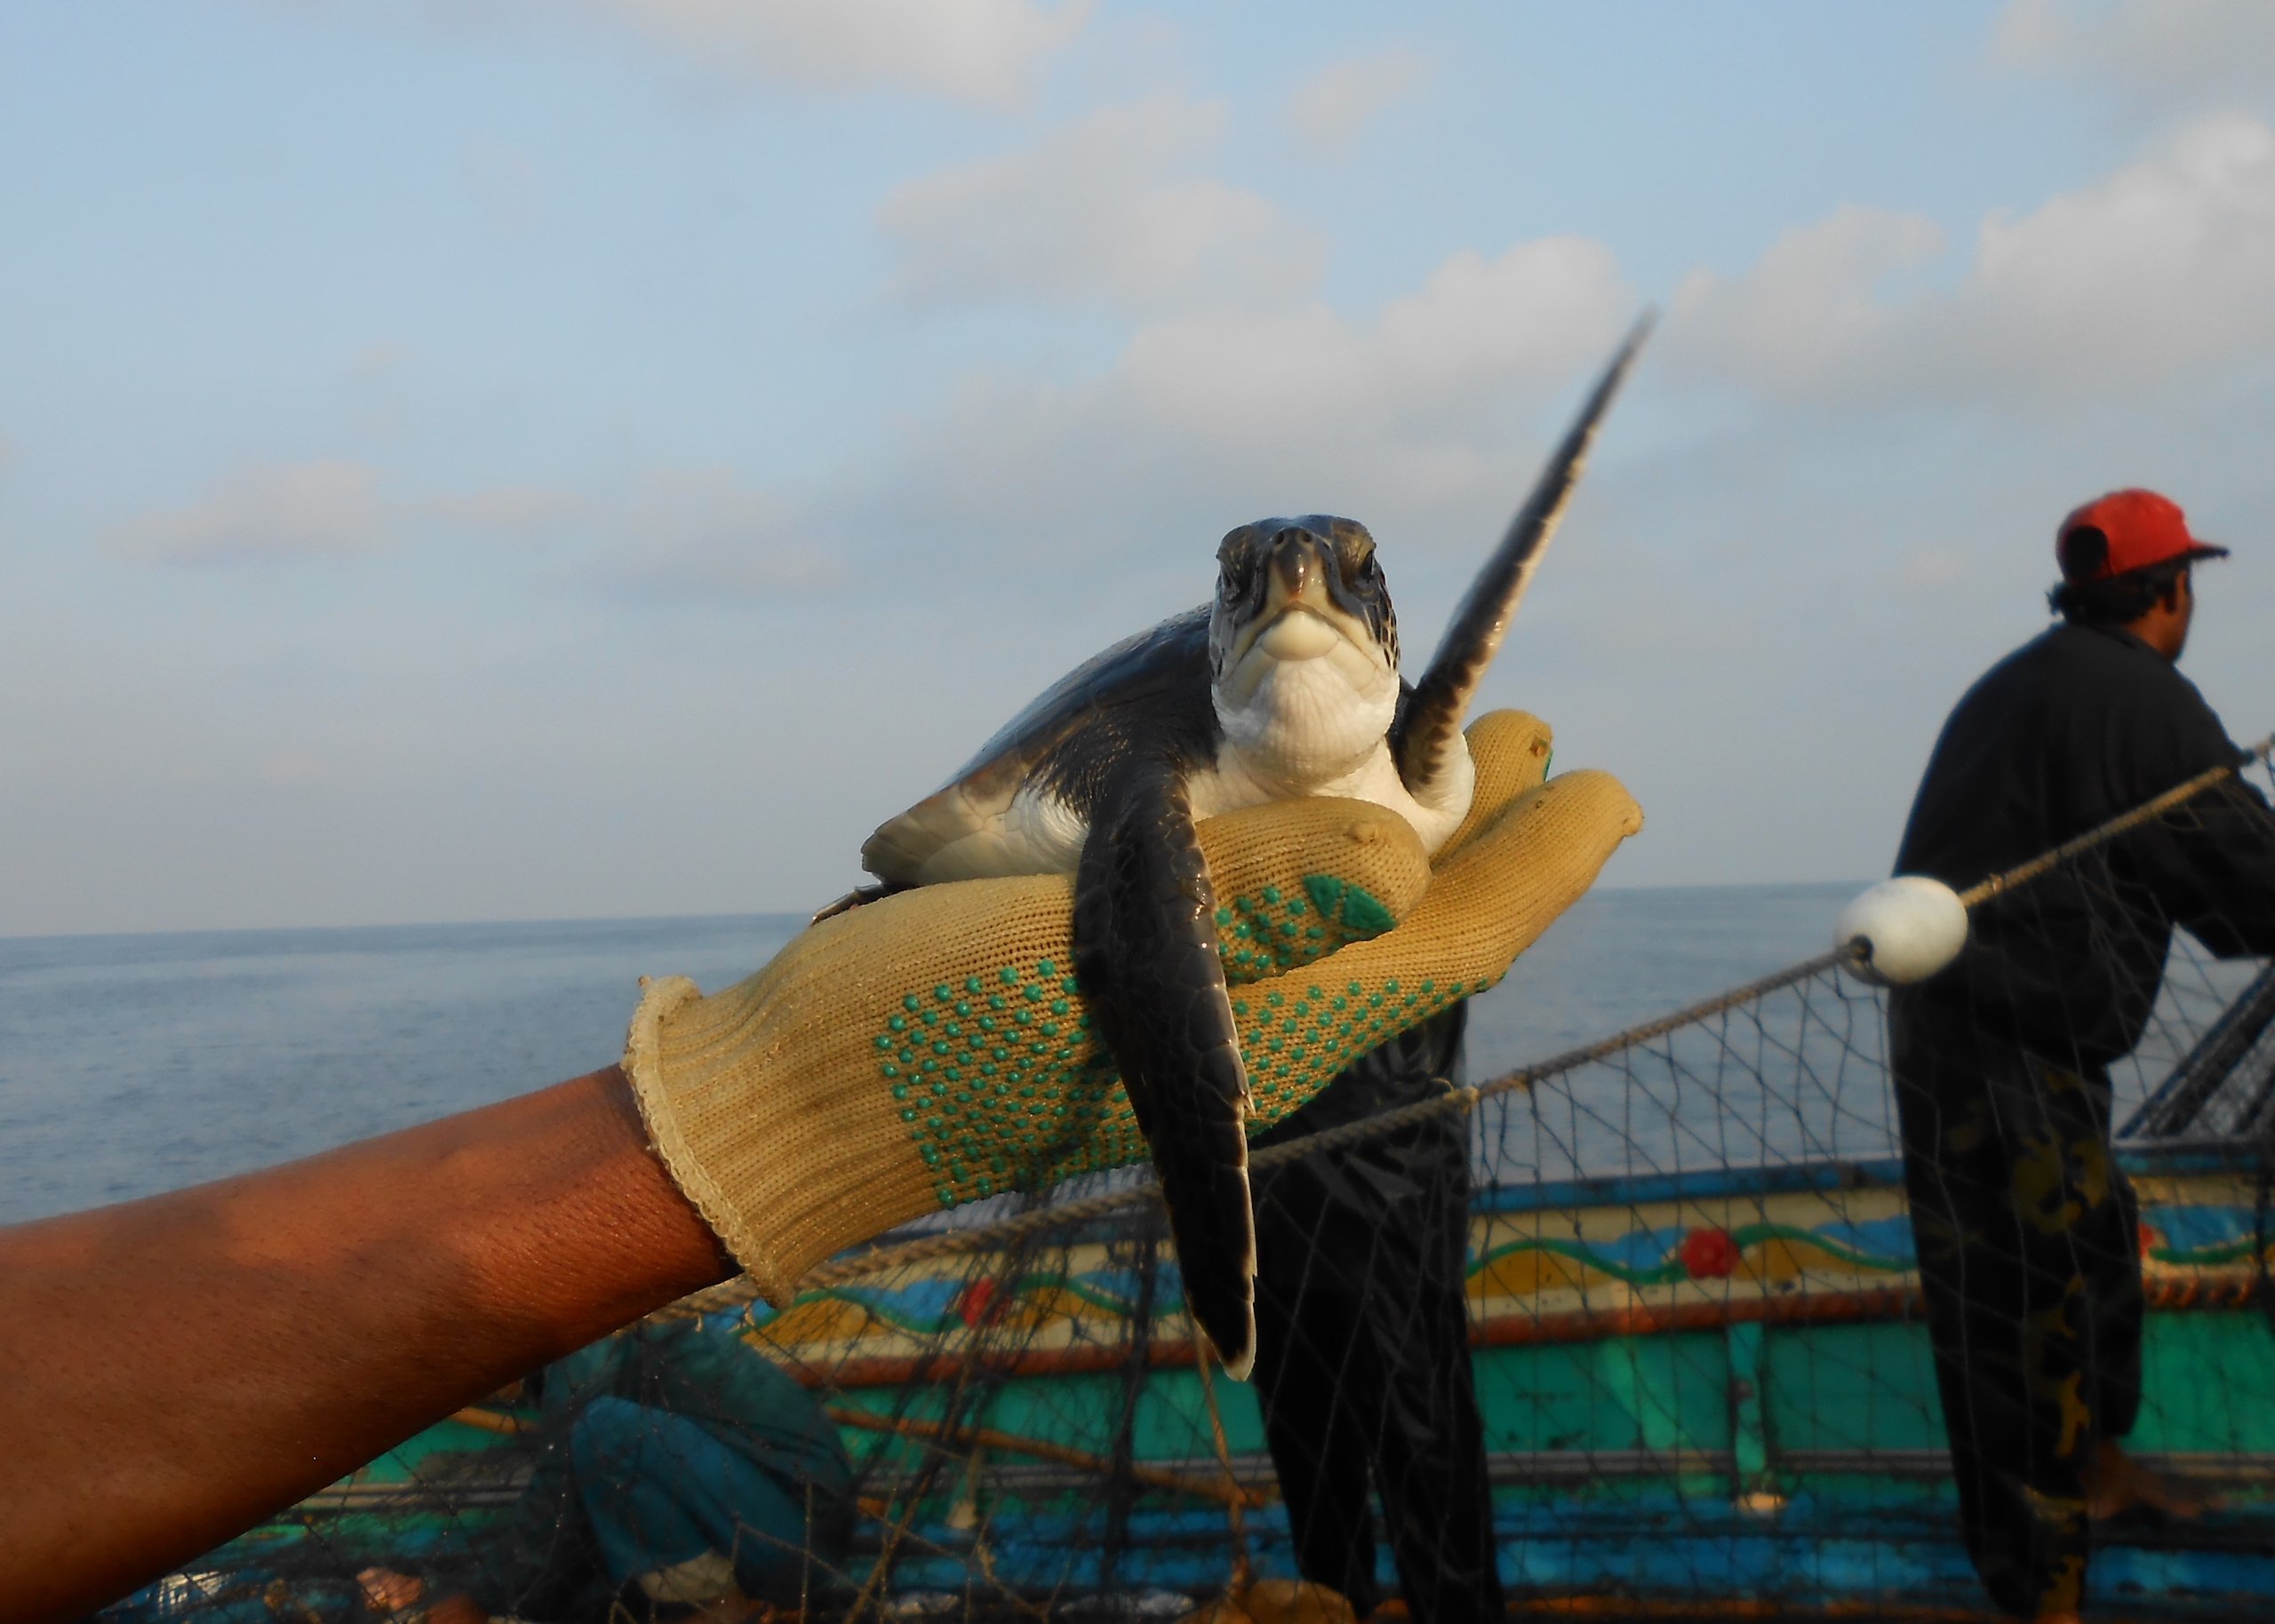 A baby green turtle in a gloved hand, on board fishing boat in Pakistani waters